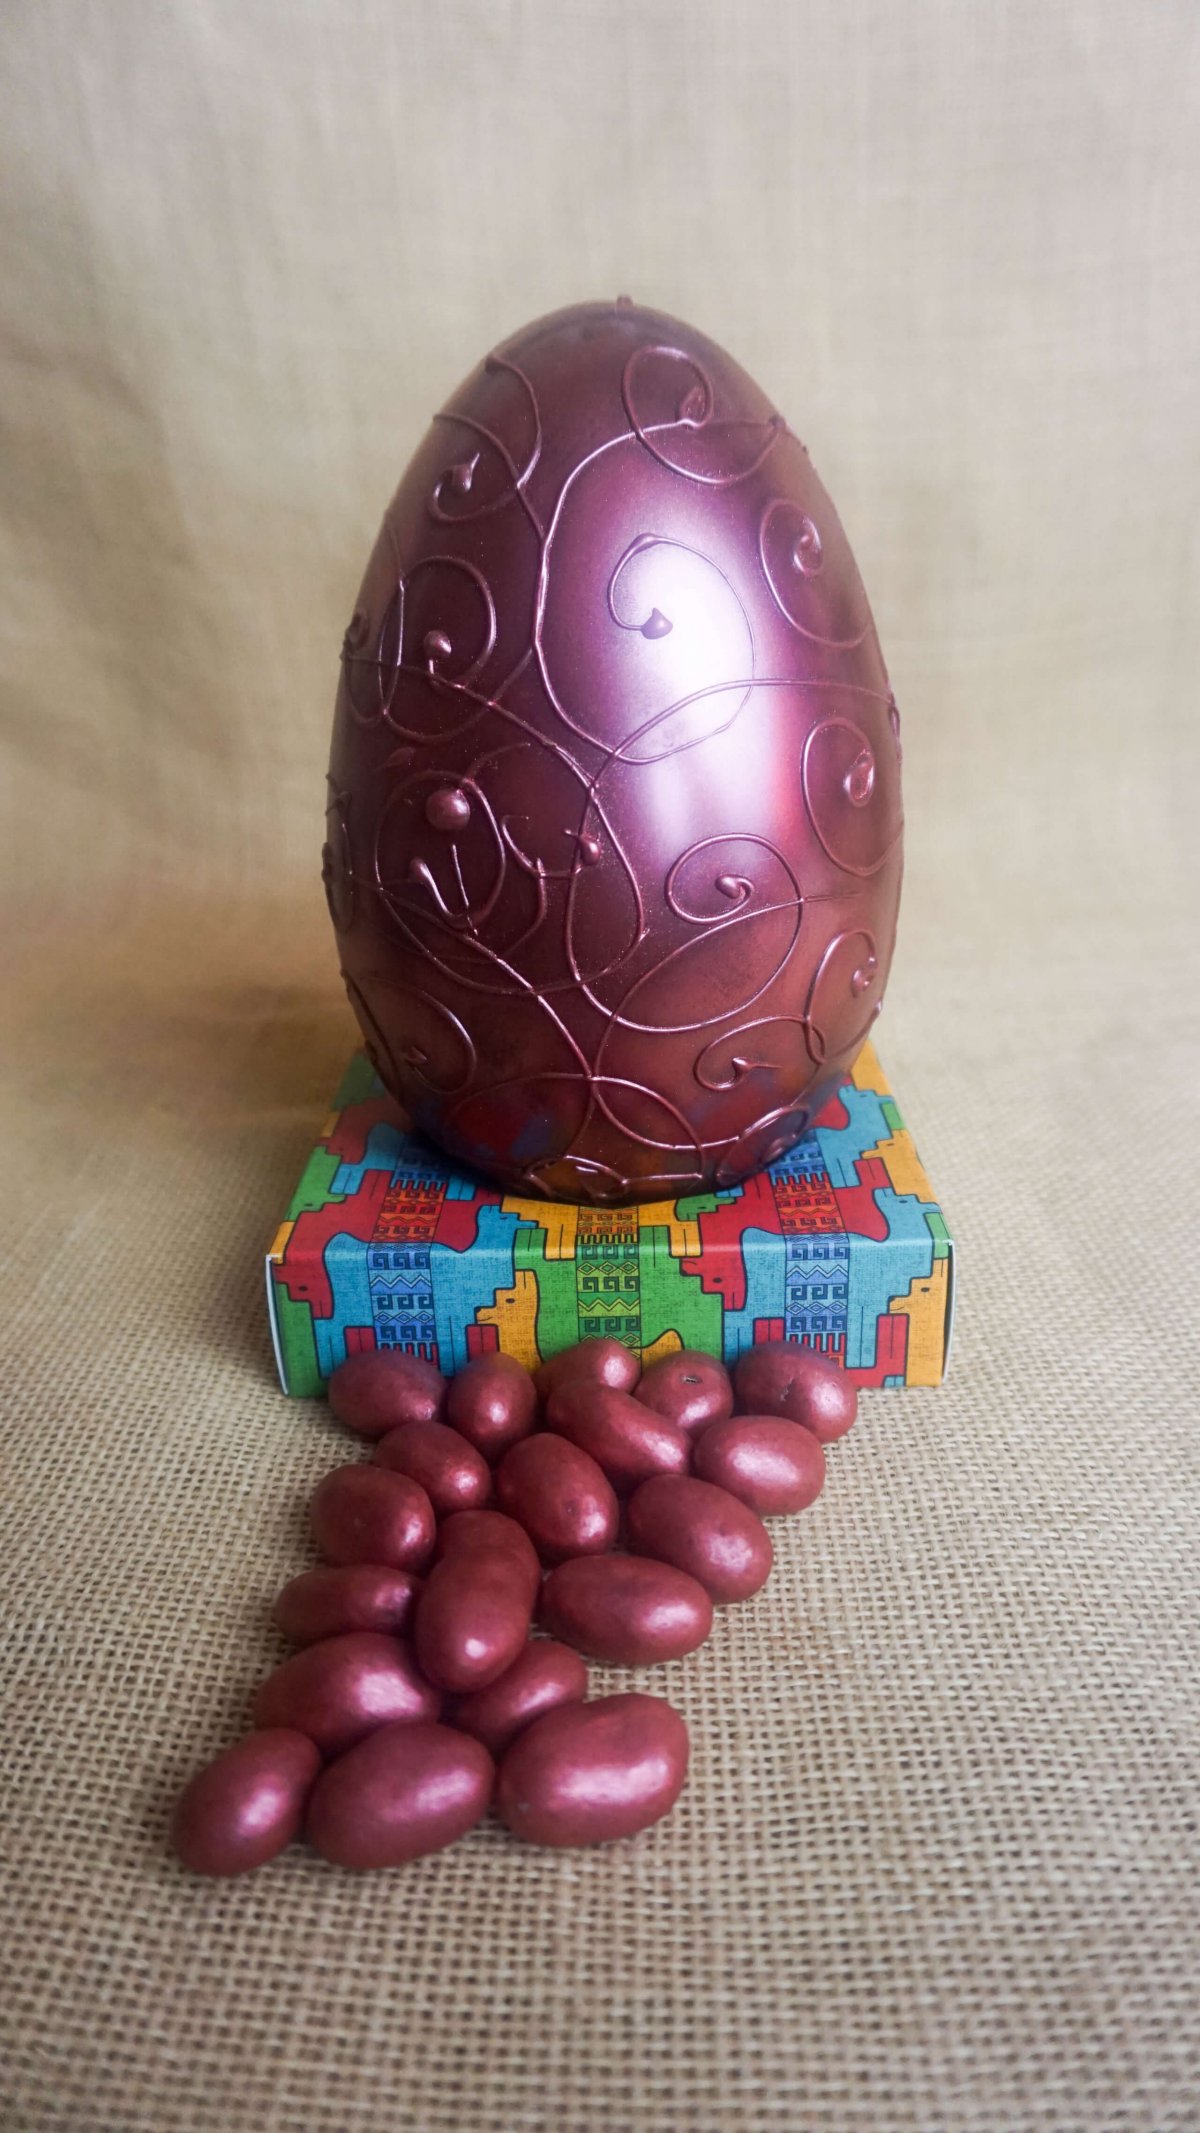 Top 10: Vegan Easter Eggs - About Time Magazine